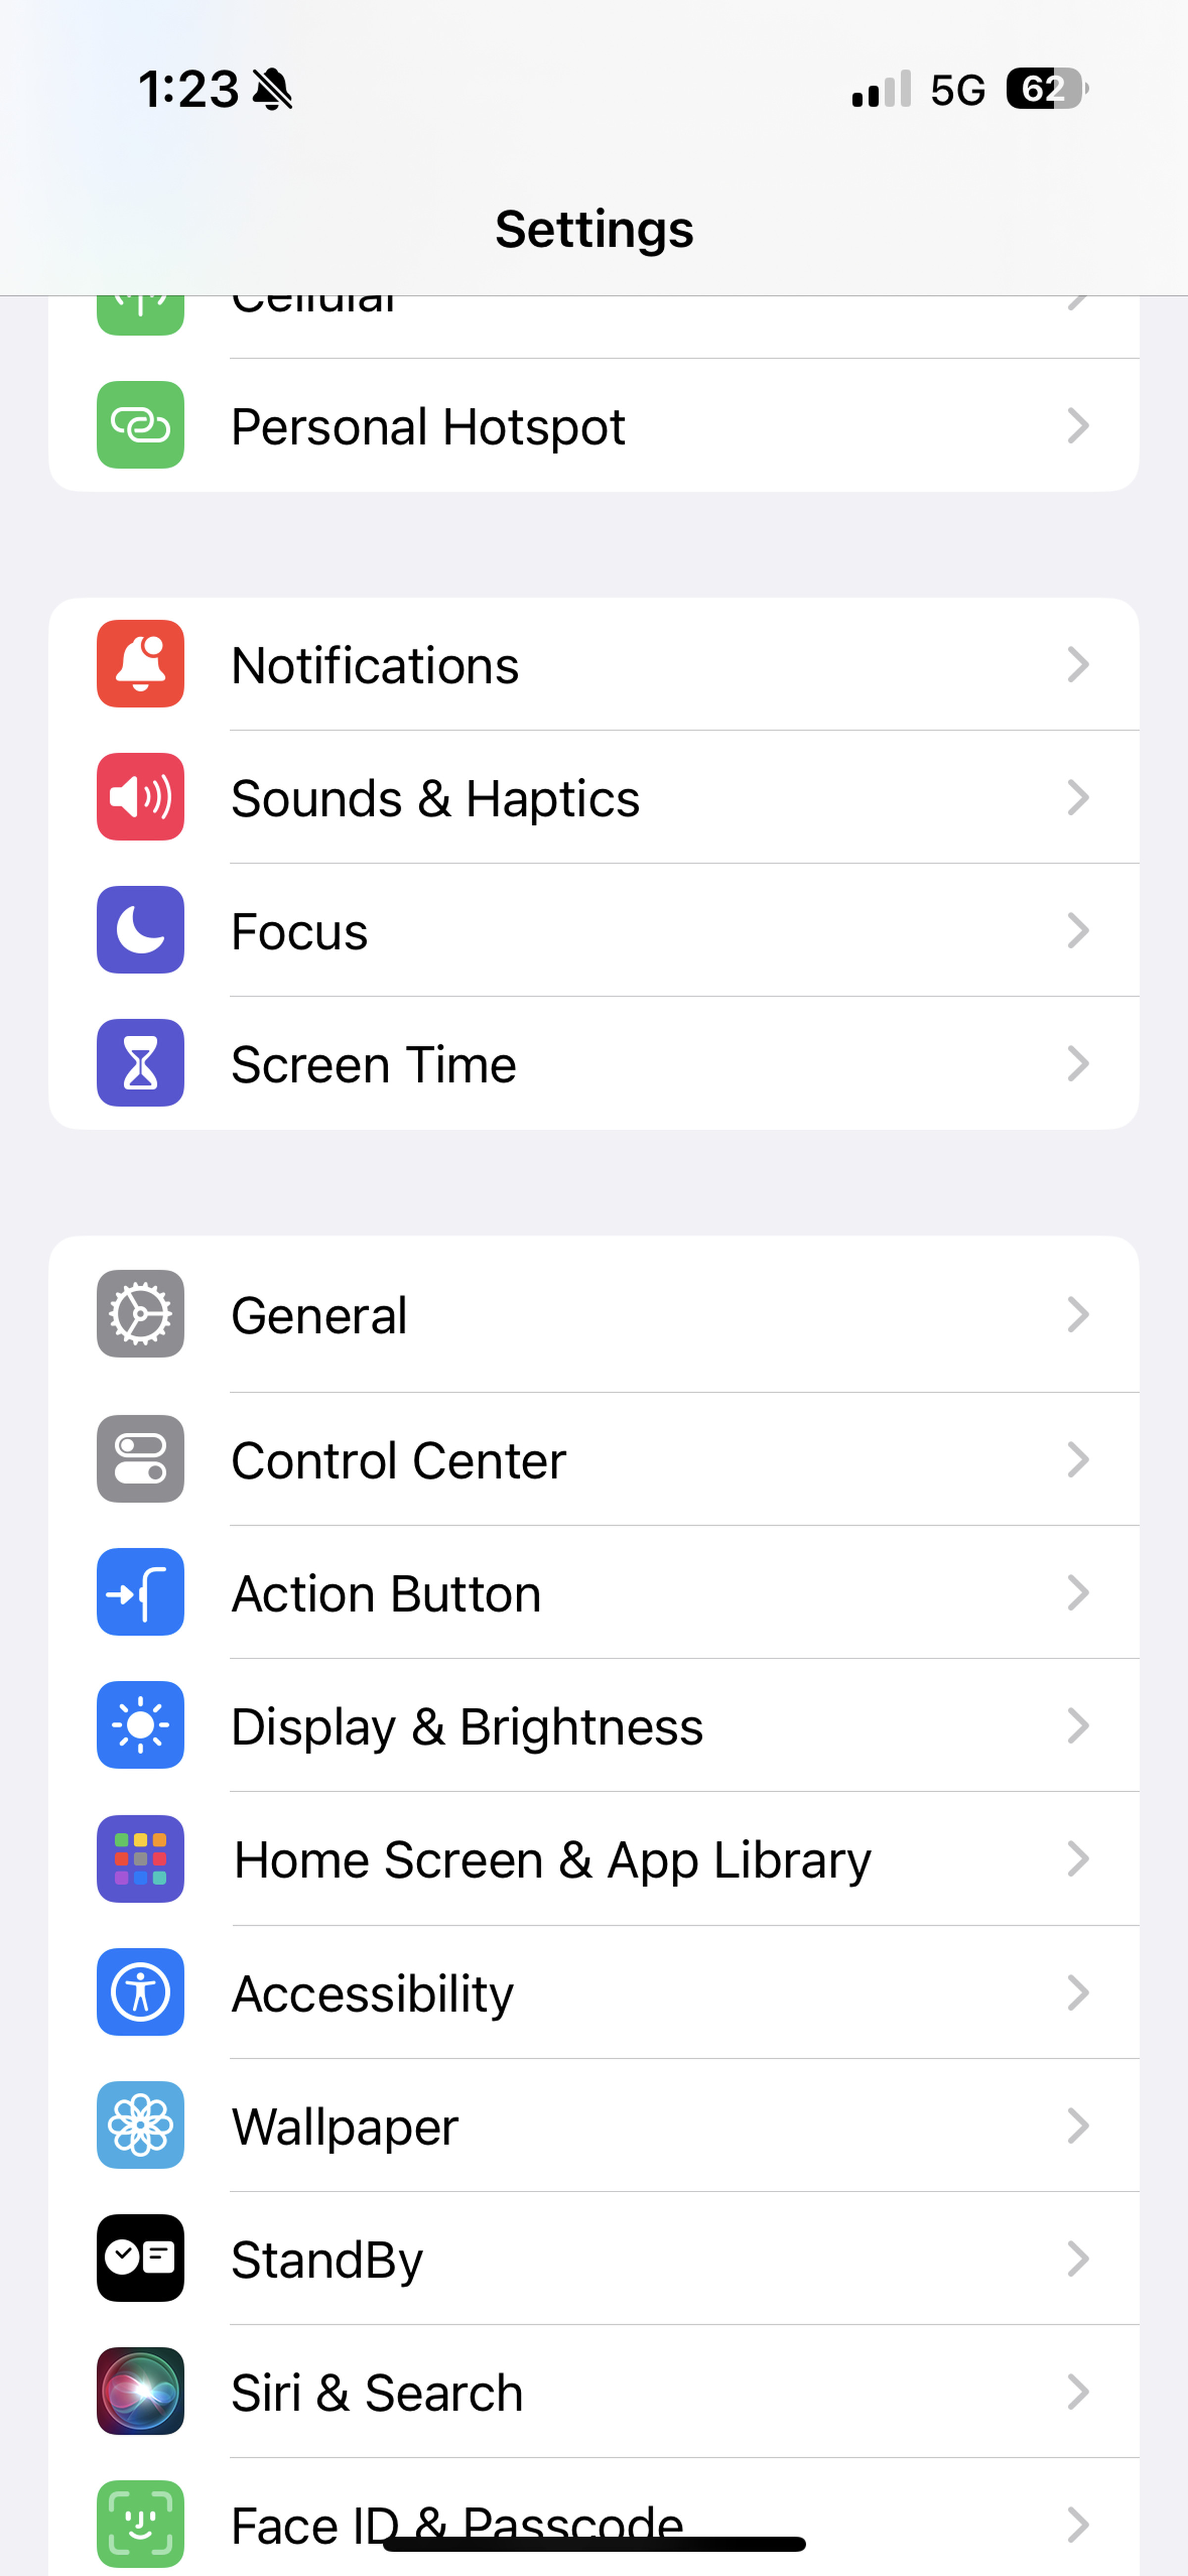 Screenshot showing iOS Settings menu with new Action Button page.